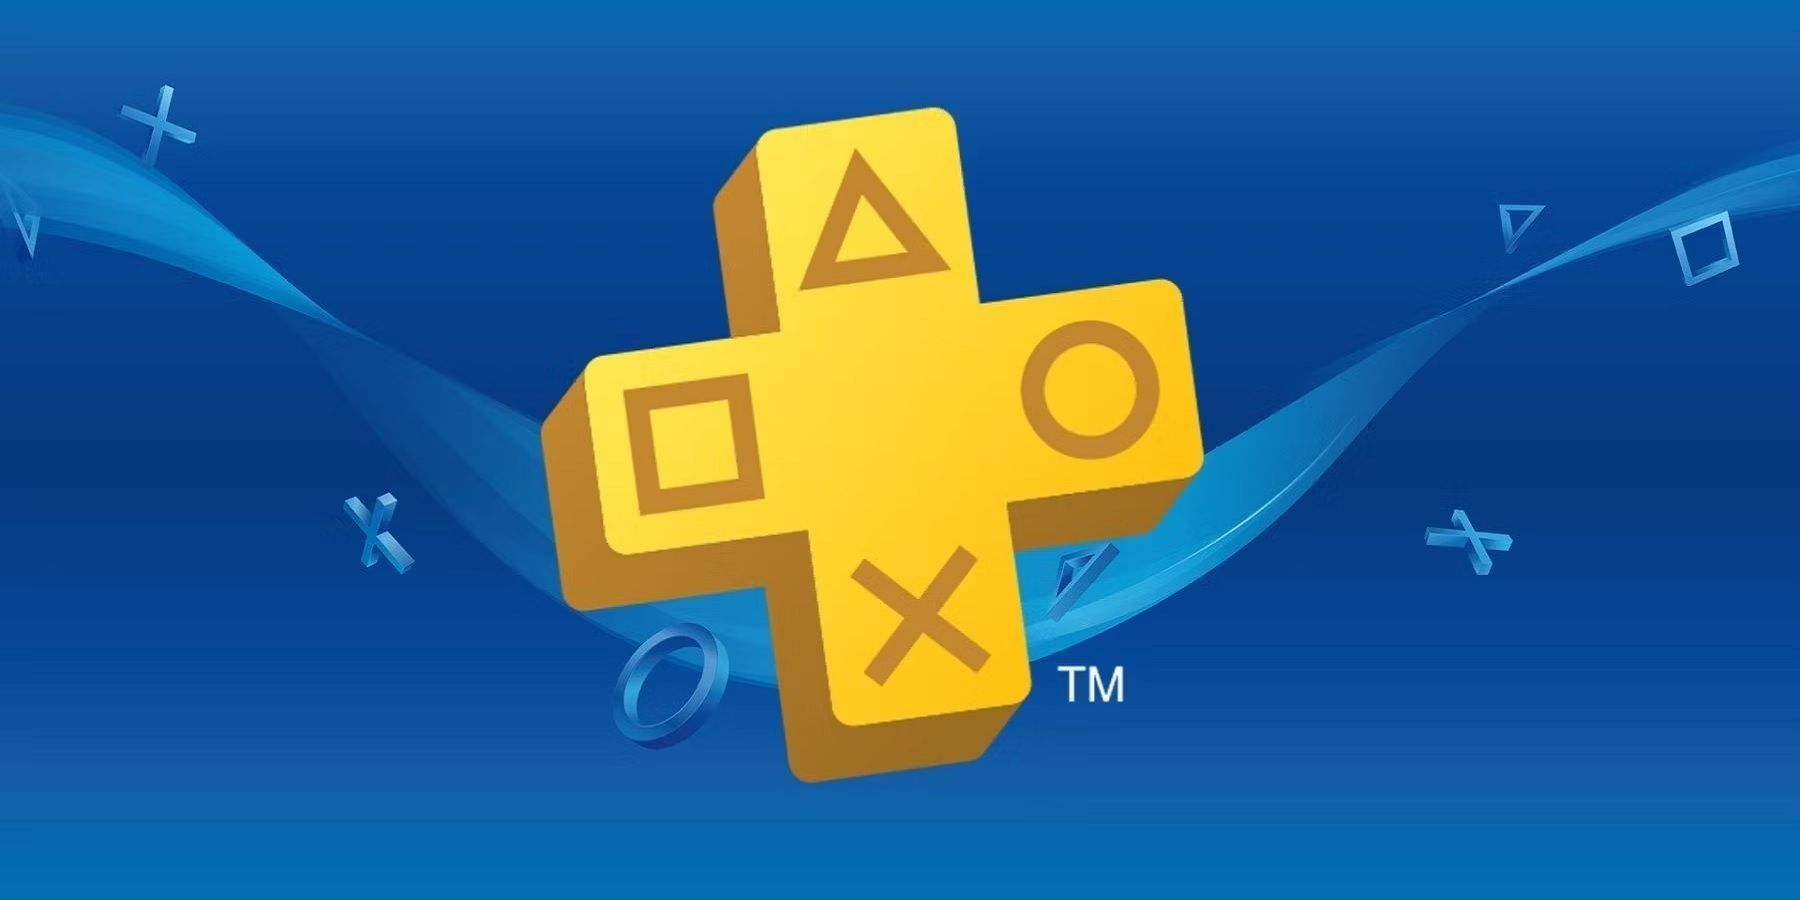 PS Plus games leak for October 2023 includes The Callisto Protocol